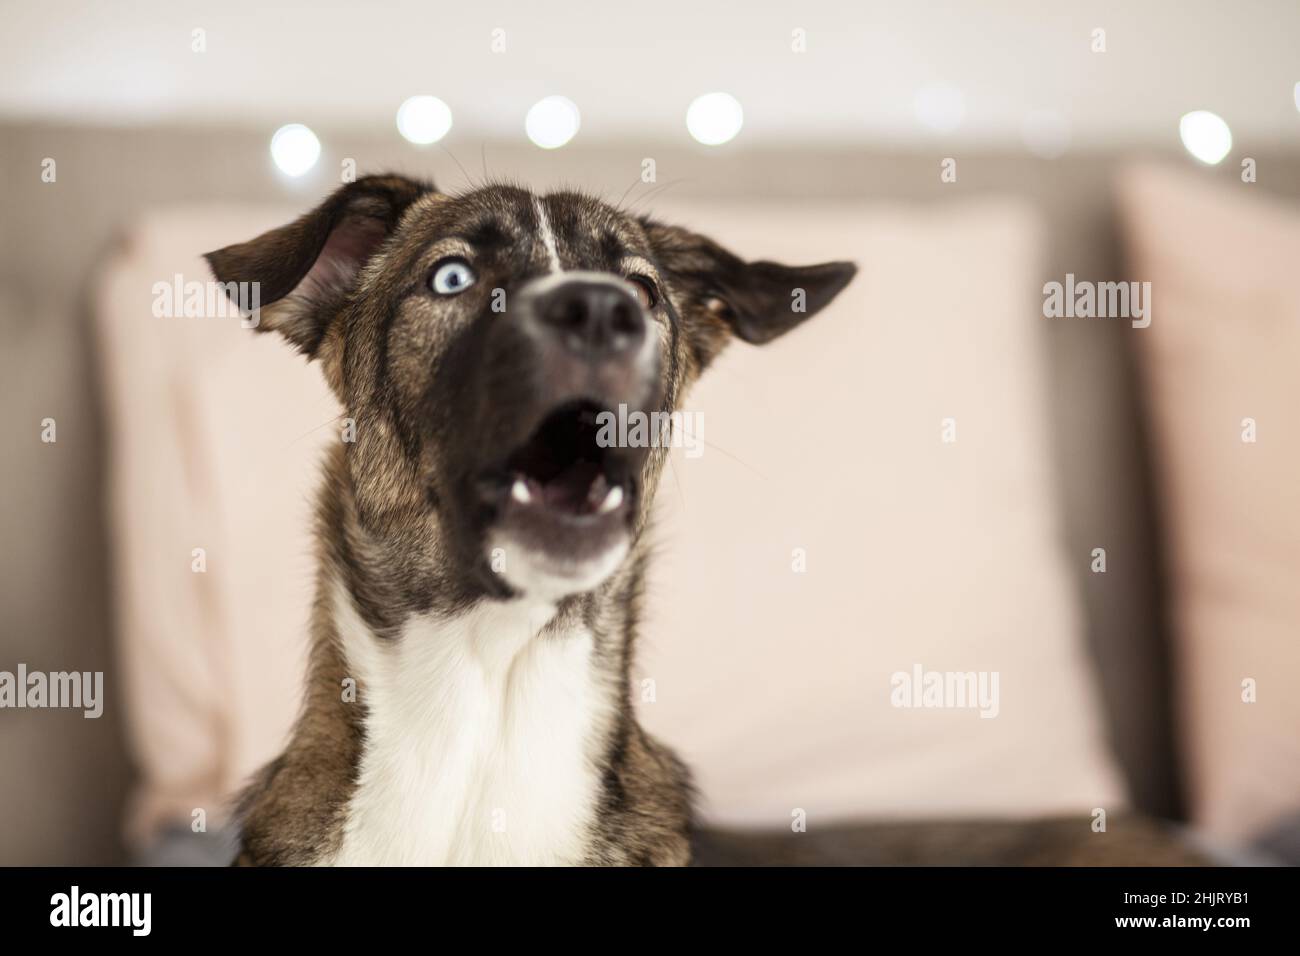 Howling dog at home, howling goberian, husky, close up, selective focus Stock Photo